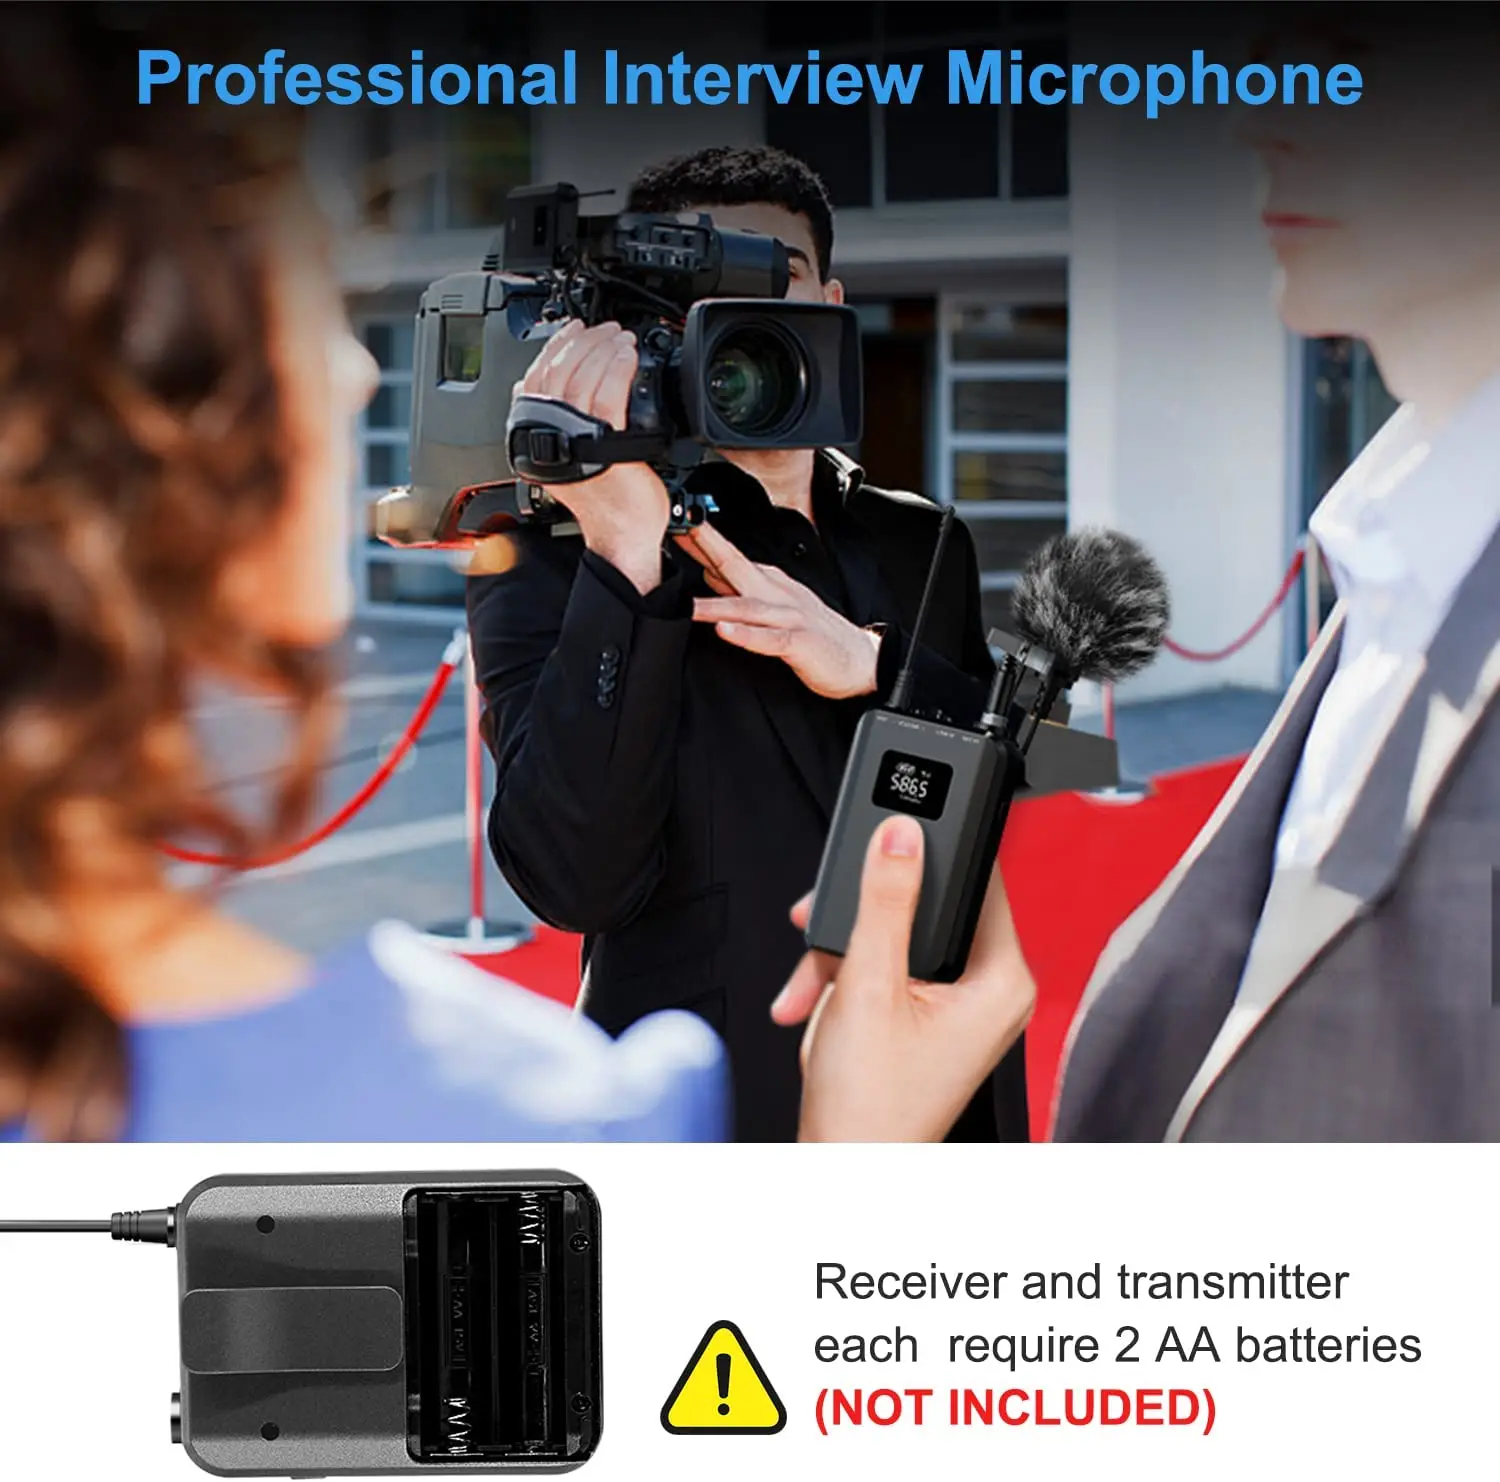 Xiaokoa Wireless Lavalier Microphone Professional UHF Wireless Mic System for DSLR Cameras Video Recording Vlogging enlarge